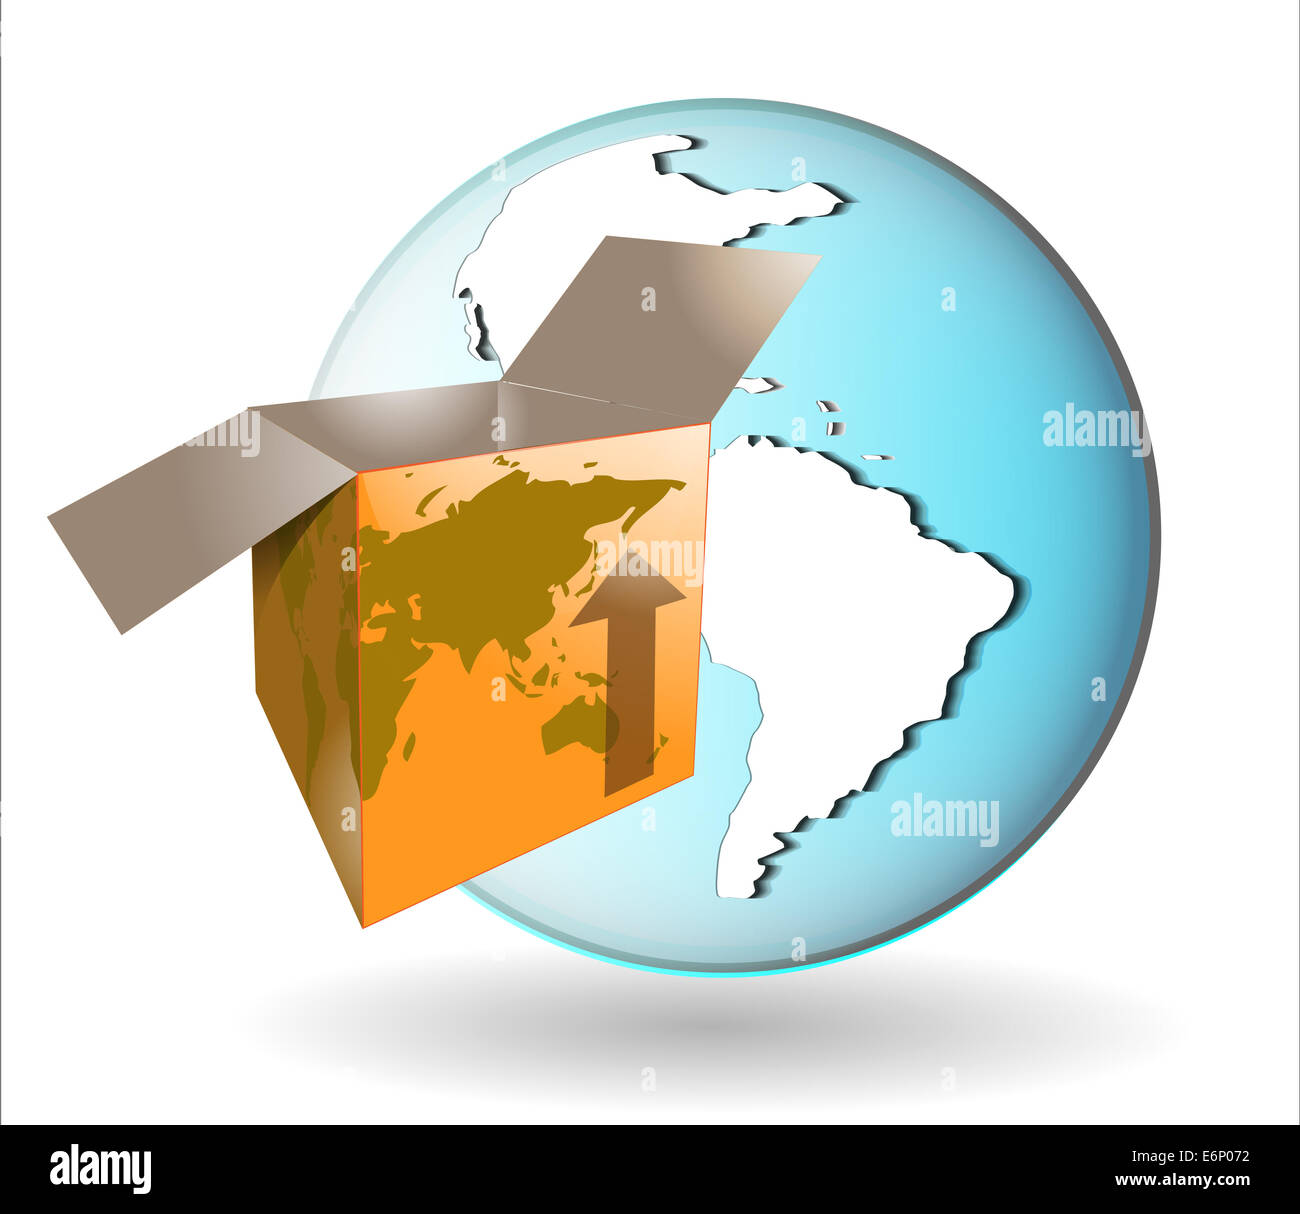 Illustration of shipping box with earth globe Stock Photo